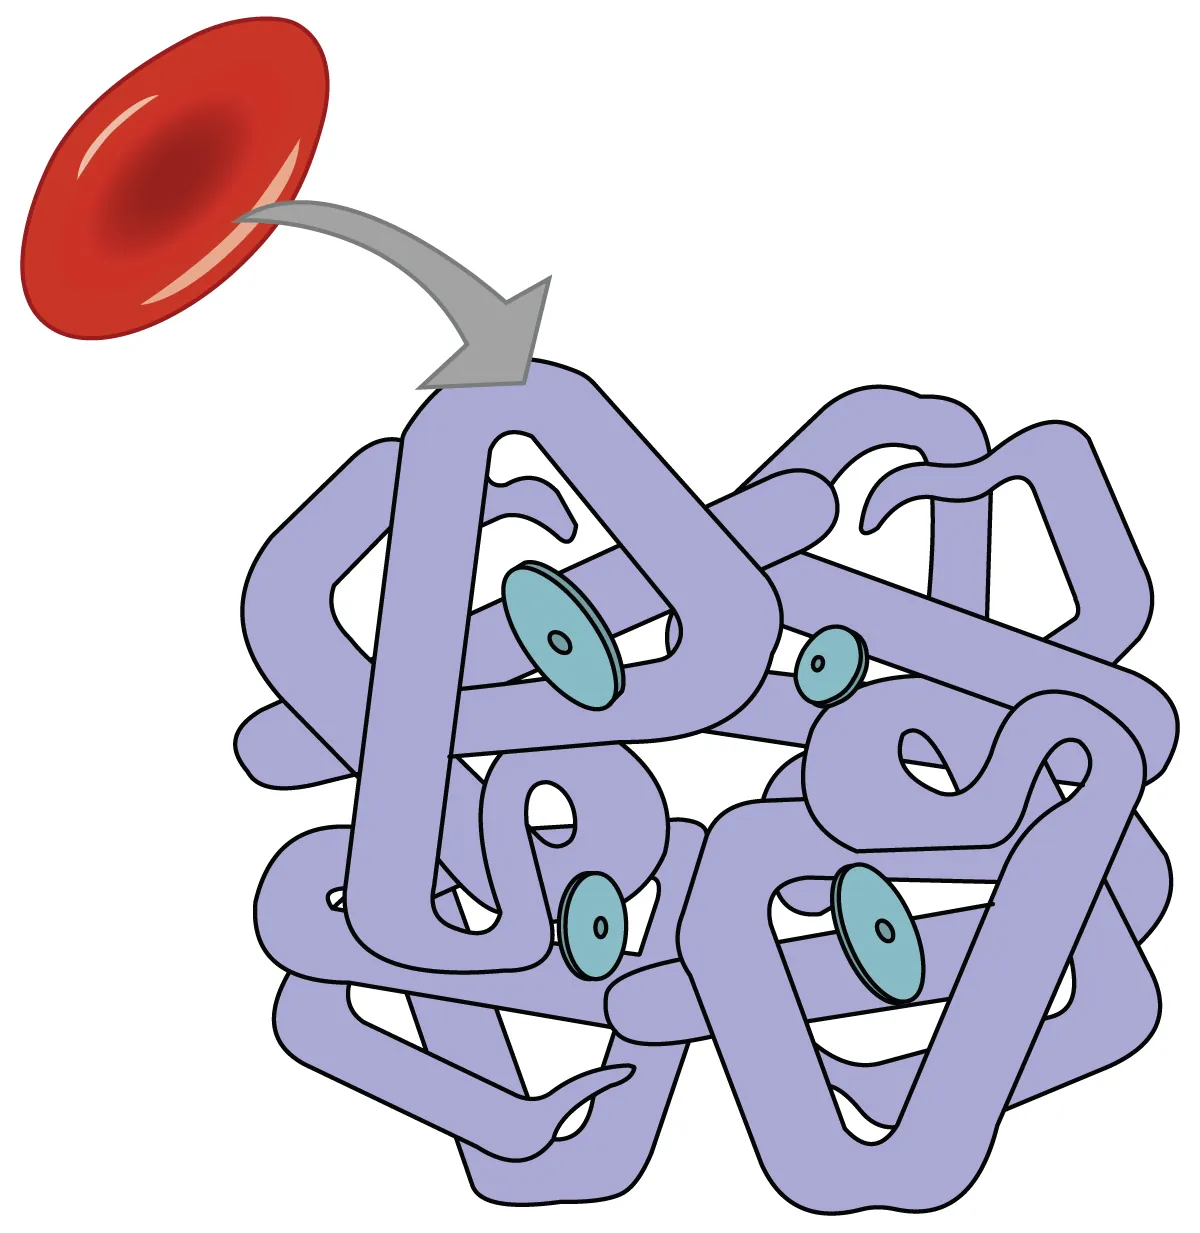 This diagram shows a red blood cell and the structure of a hemoglobin molecule.